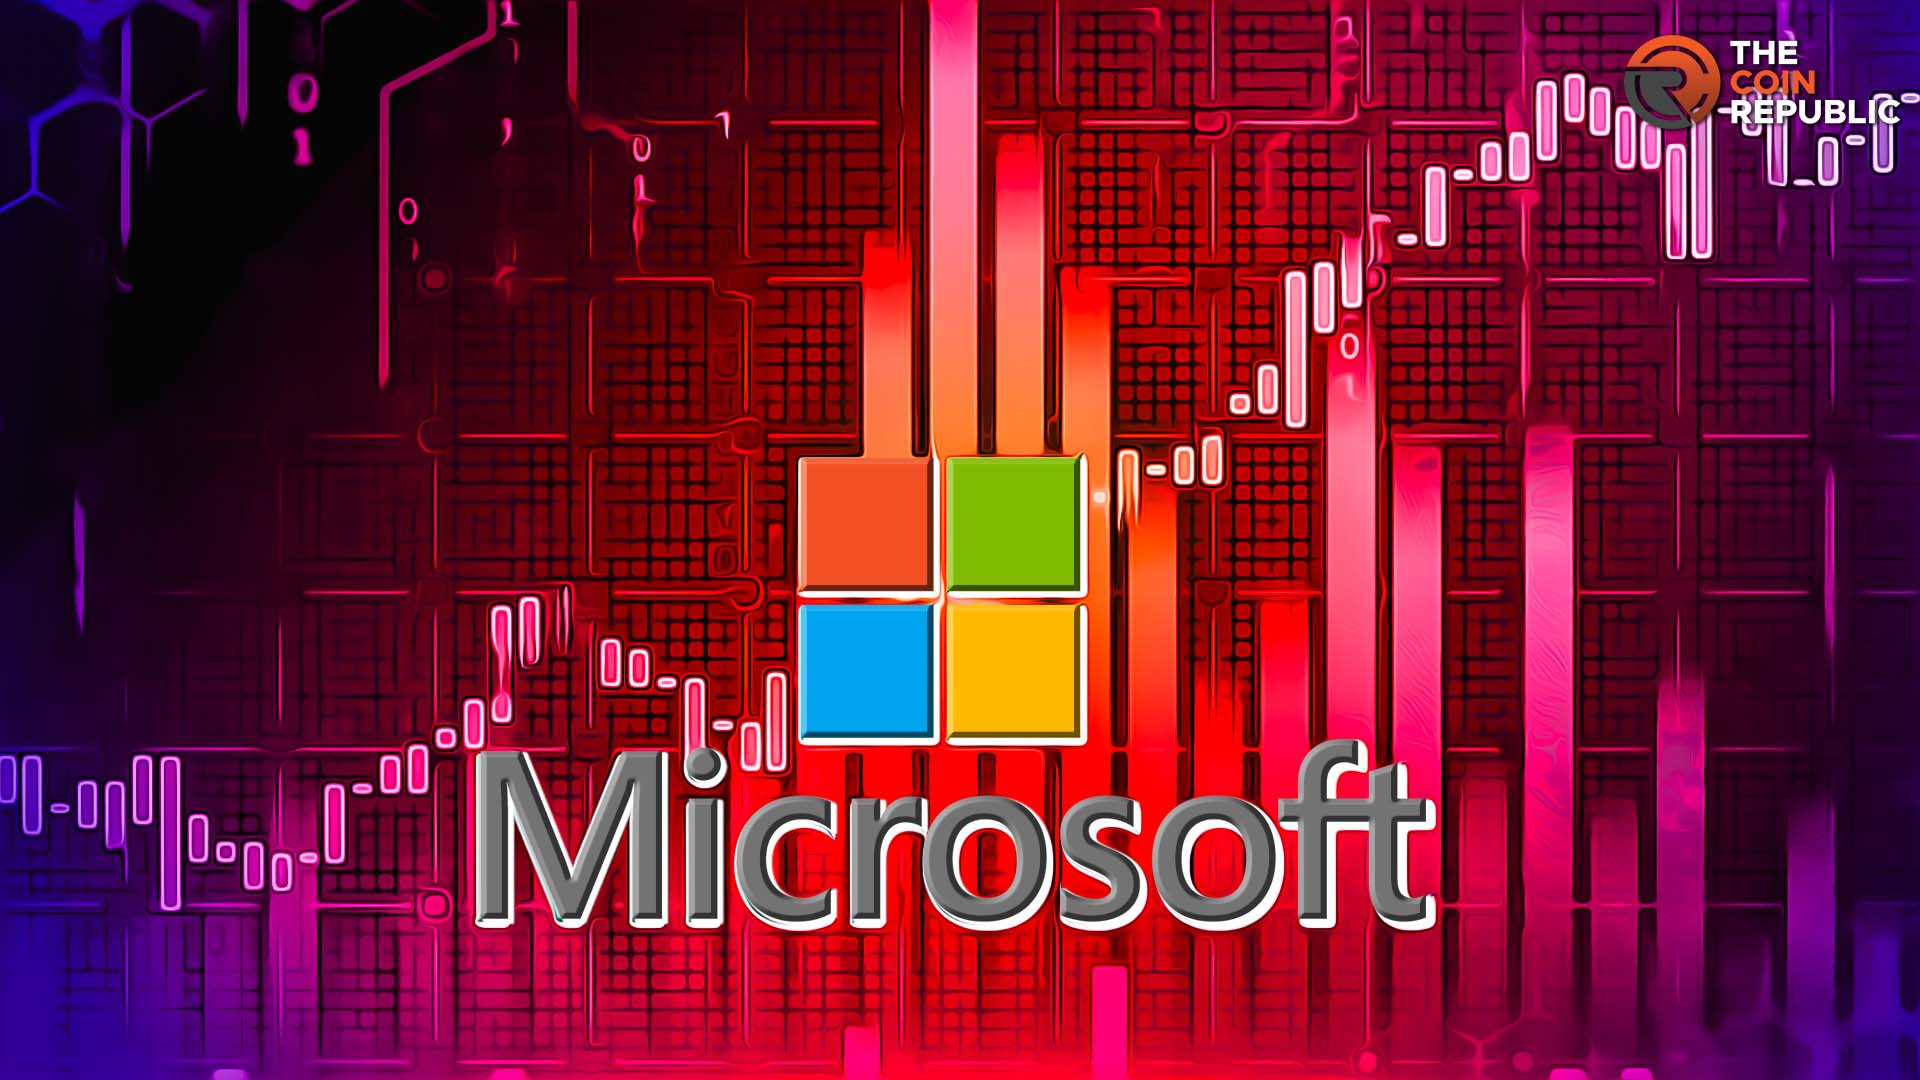 Microsoft (MSFT) Stock: Is it Good For Long-Term Investment?